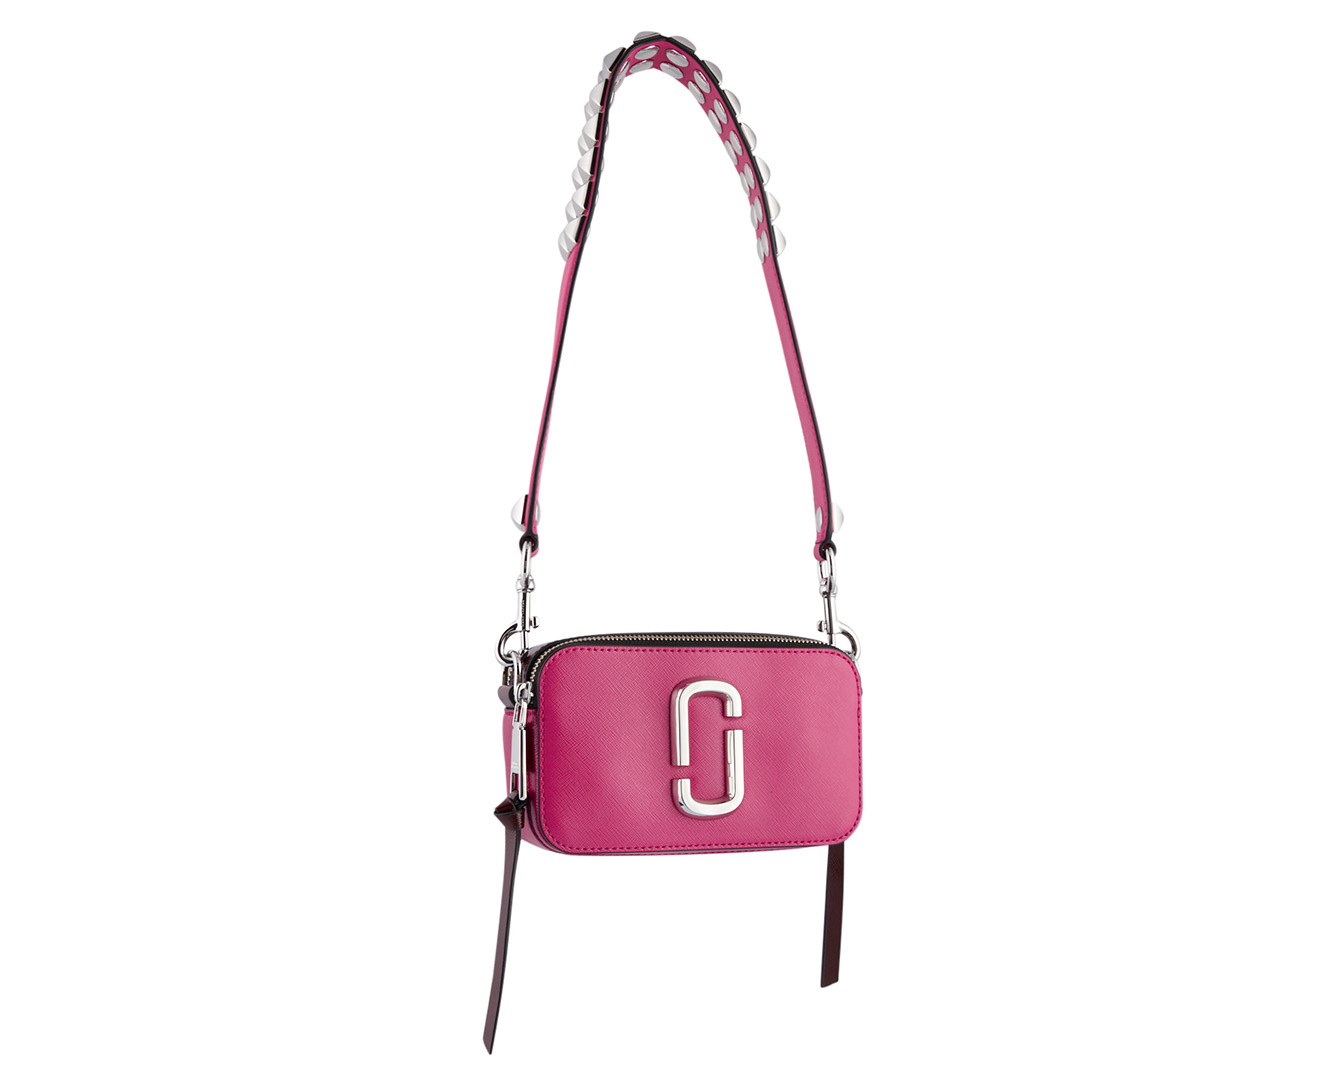 Pink Snapshot Studded Leather Cross Body Bag In Magenta Multi